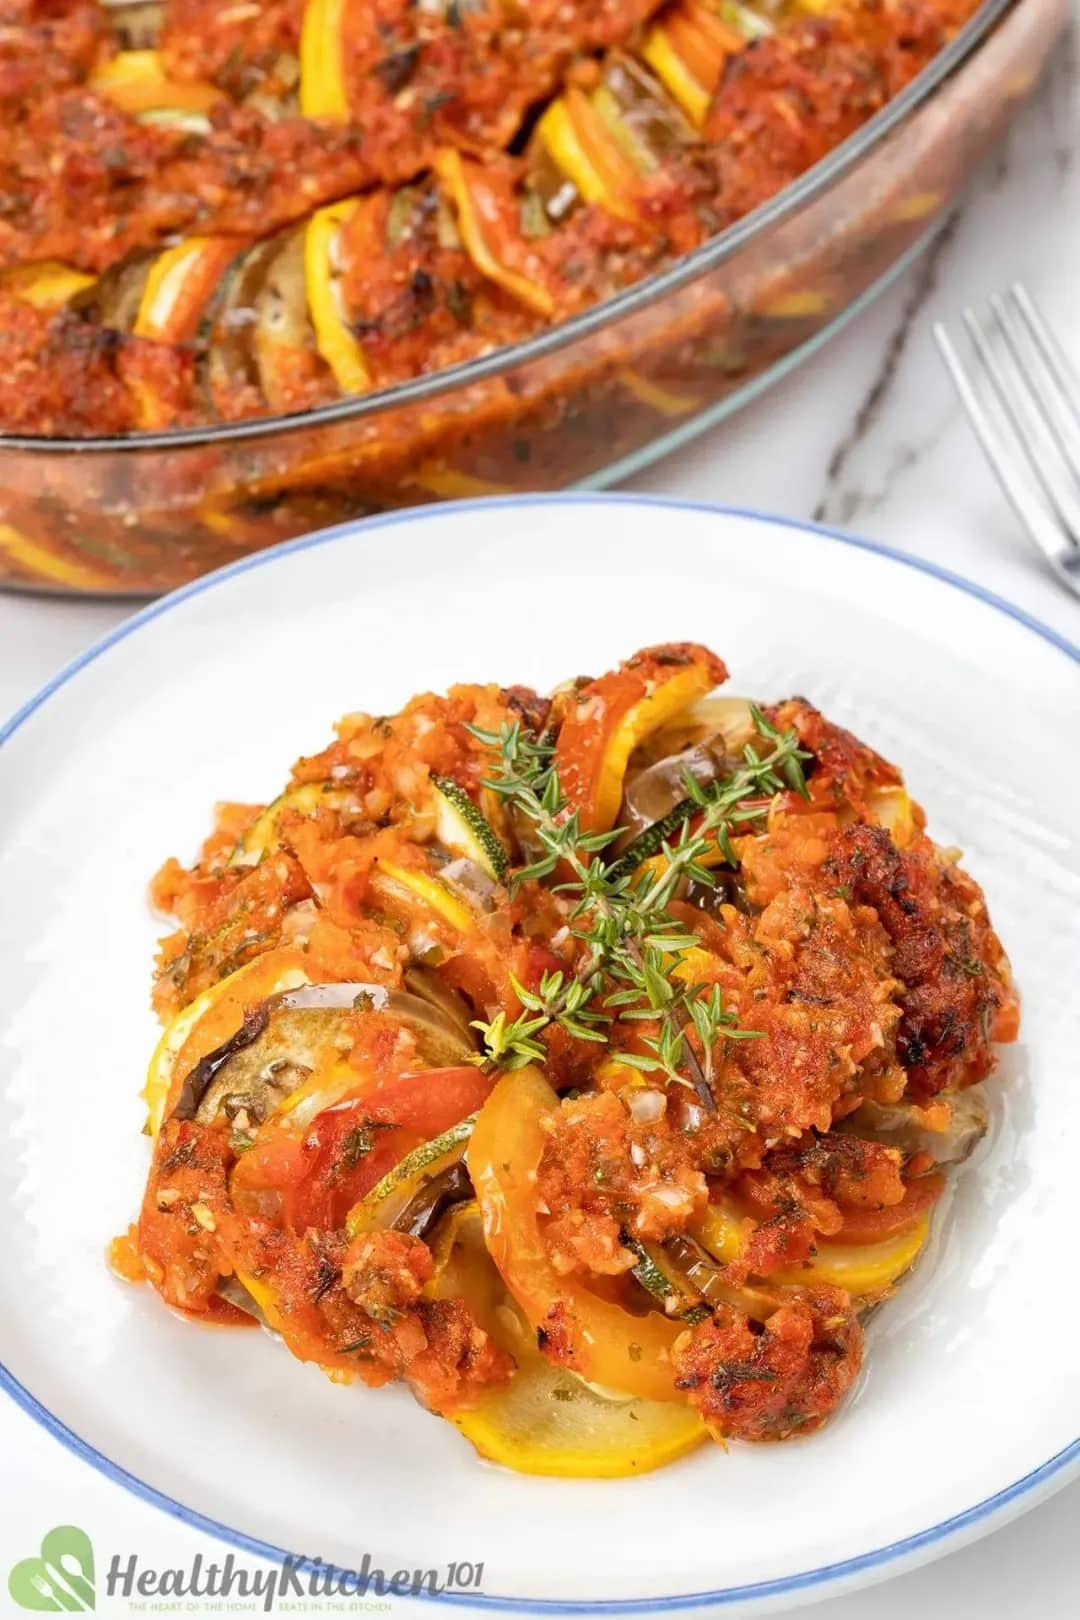 A plate of stuffed zucchini with tomato sauce and thyme from 60 Vegan Casserole Recipes.